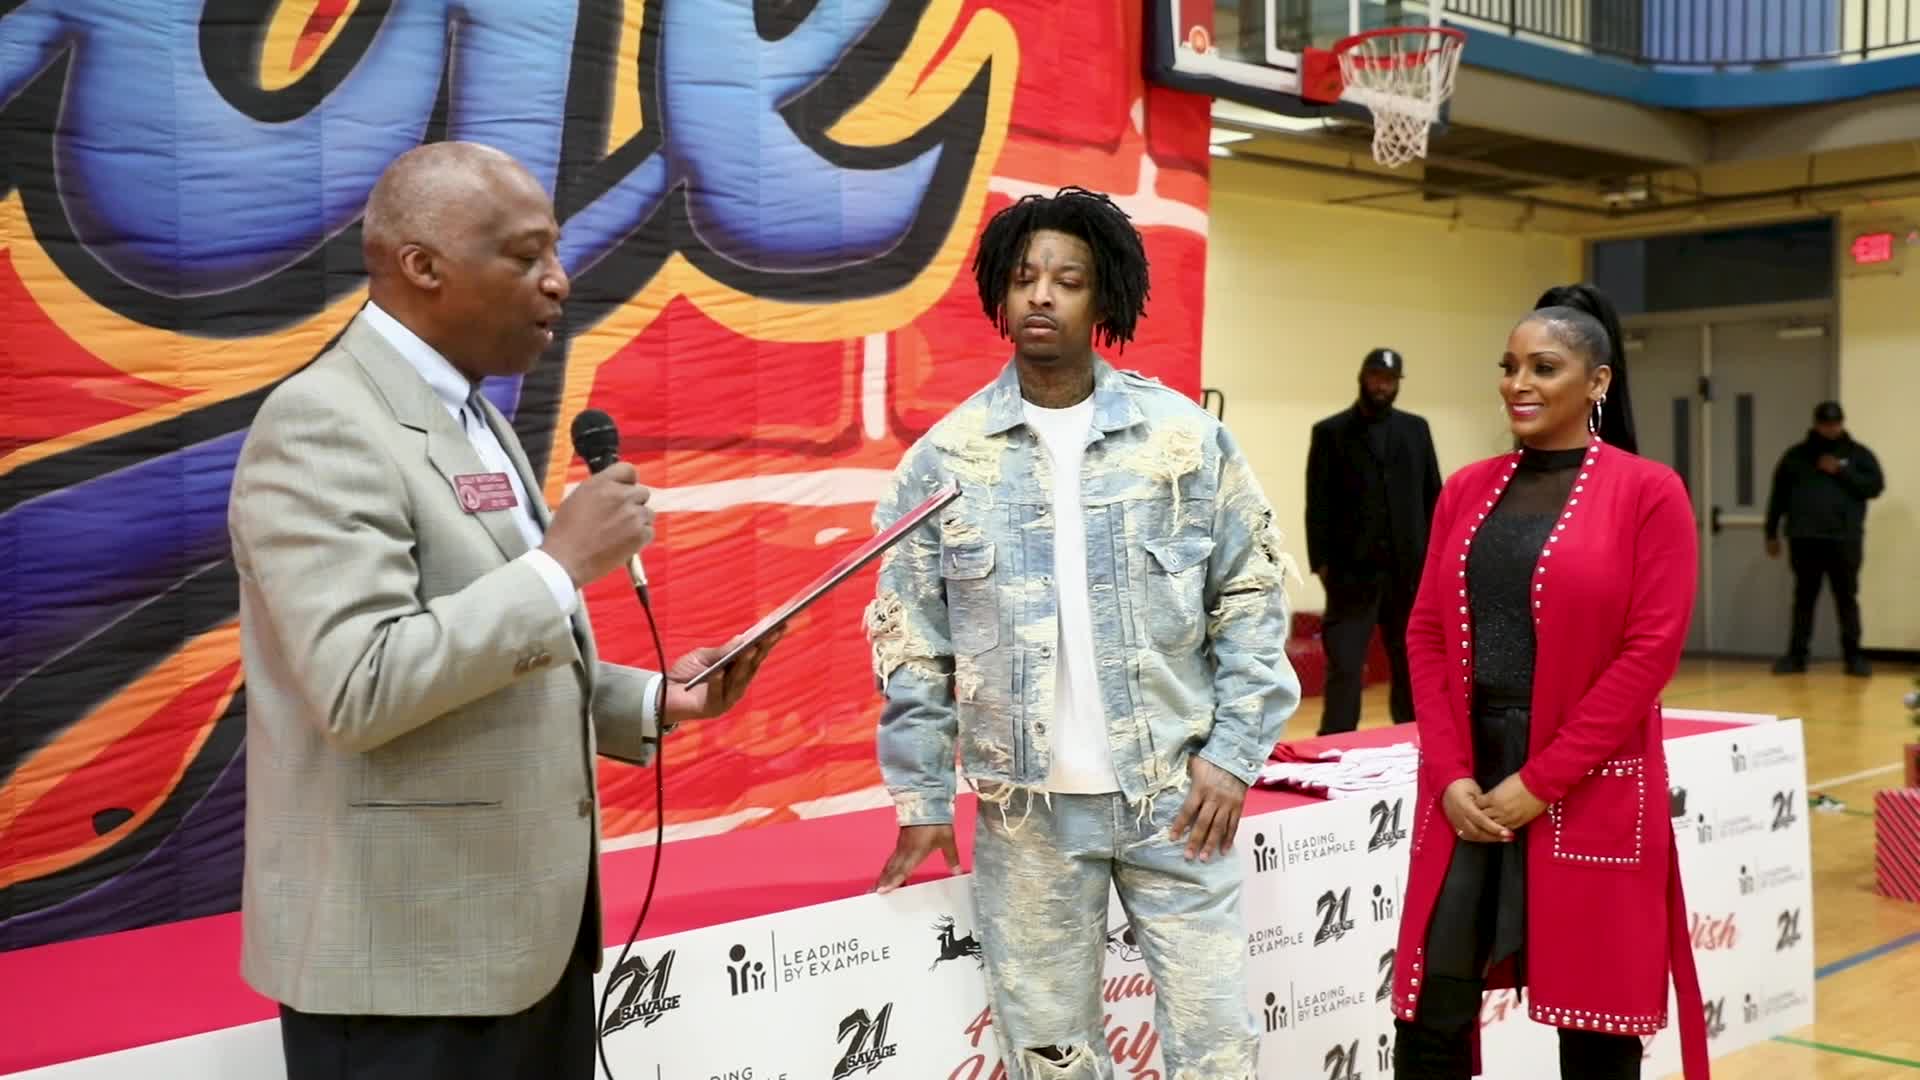 21 Savage & Chime: Reconnecting with the Atlanta Community